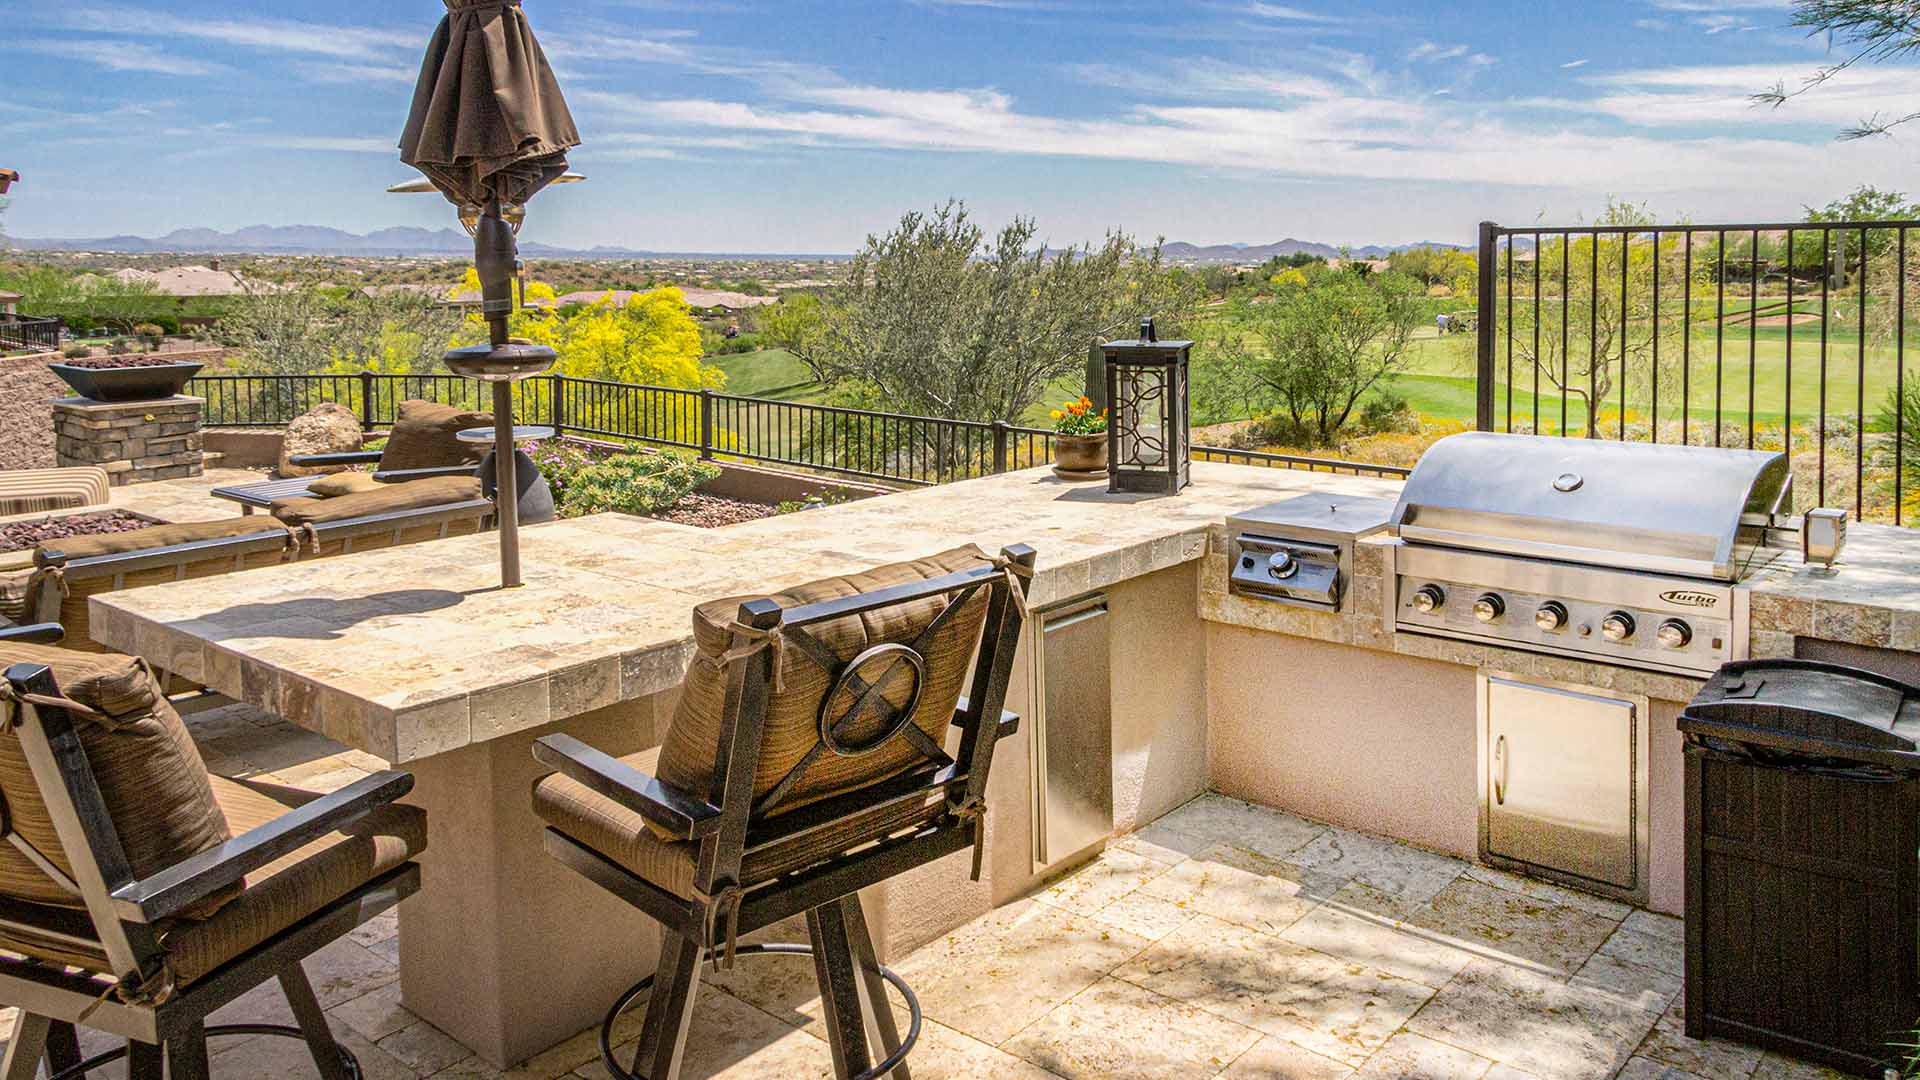 Traditional Old World Outdoor Kitchen Ideas